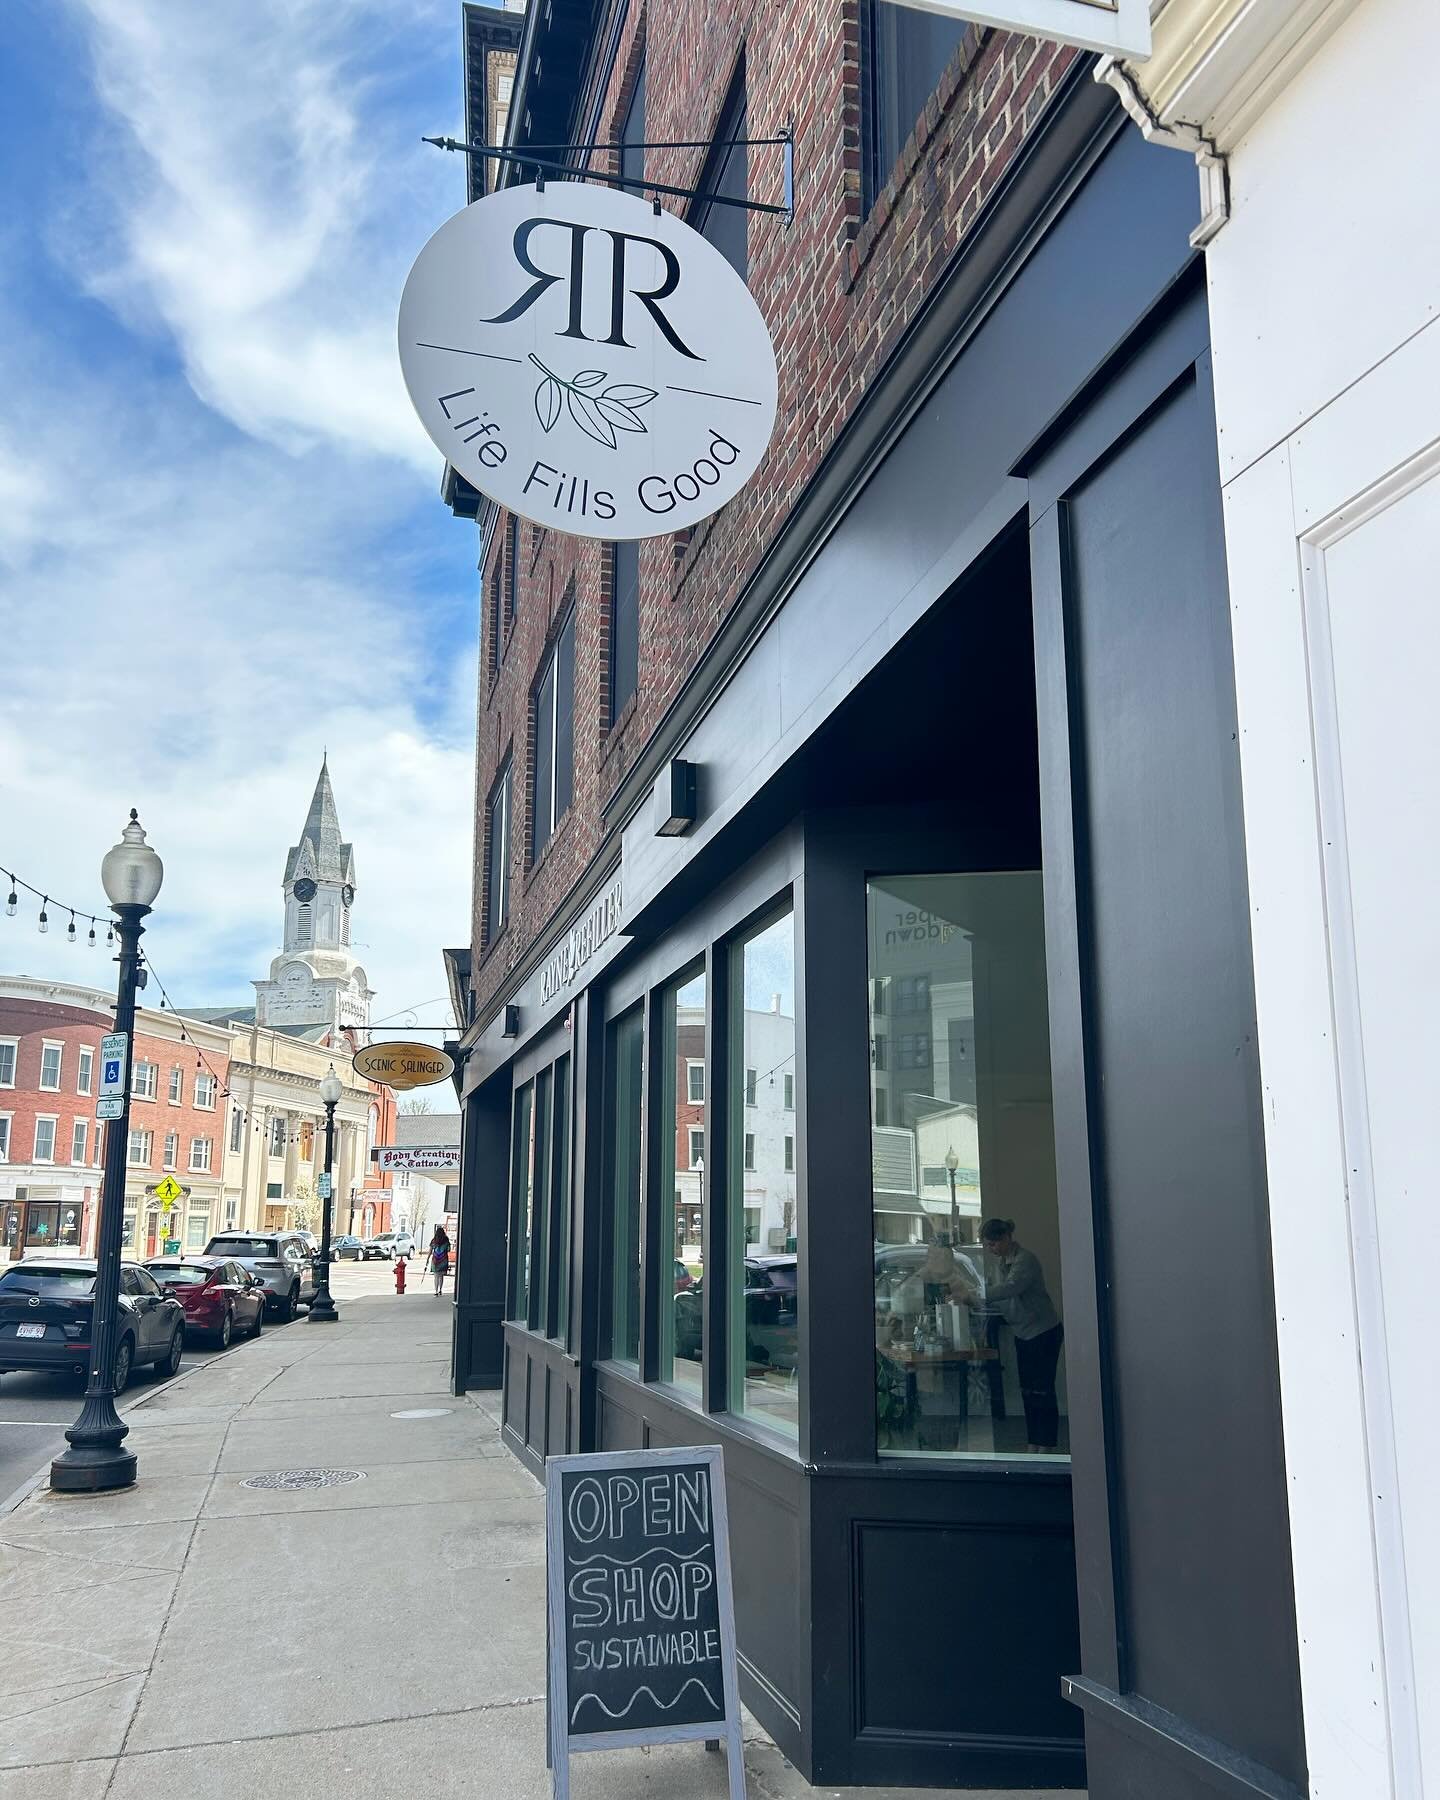 Bluebird day in downtown Rochester ☀️

#rochesternh #newhampshire #nowleasing #thehowardrochester